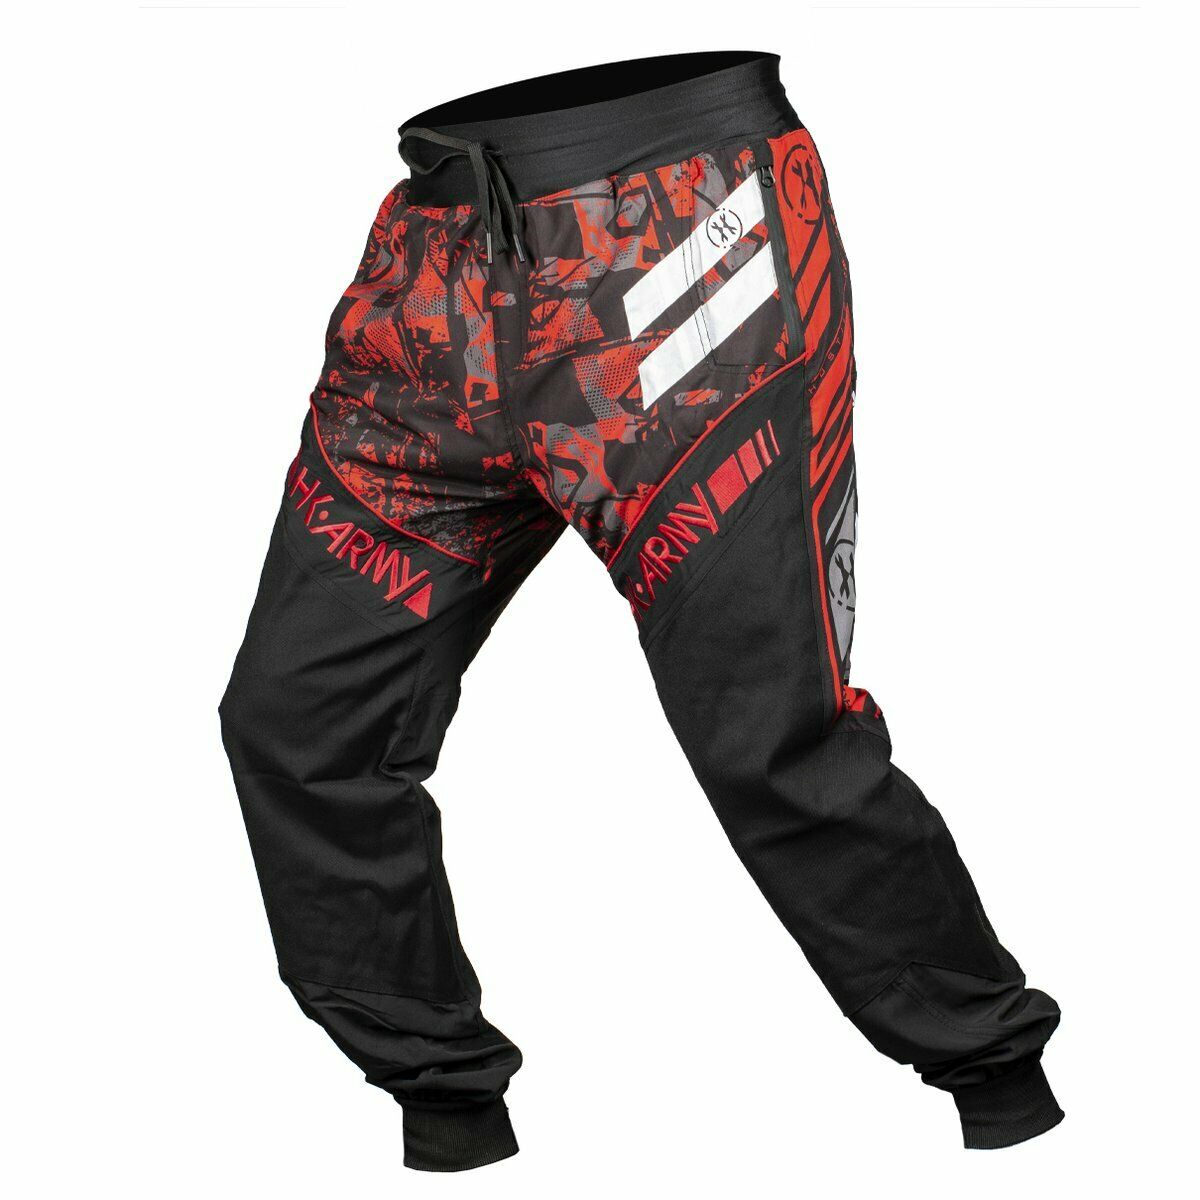 Hk Army Trk Air Jogger Pants - Scorch - X-large (34-38)  **free Shipping**